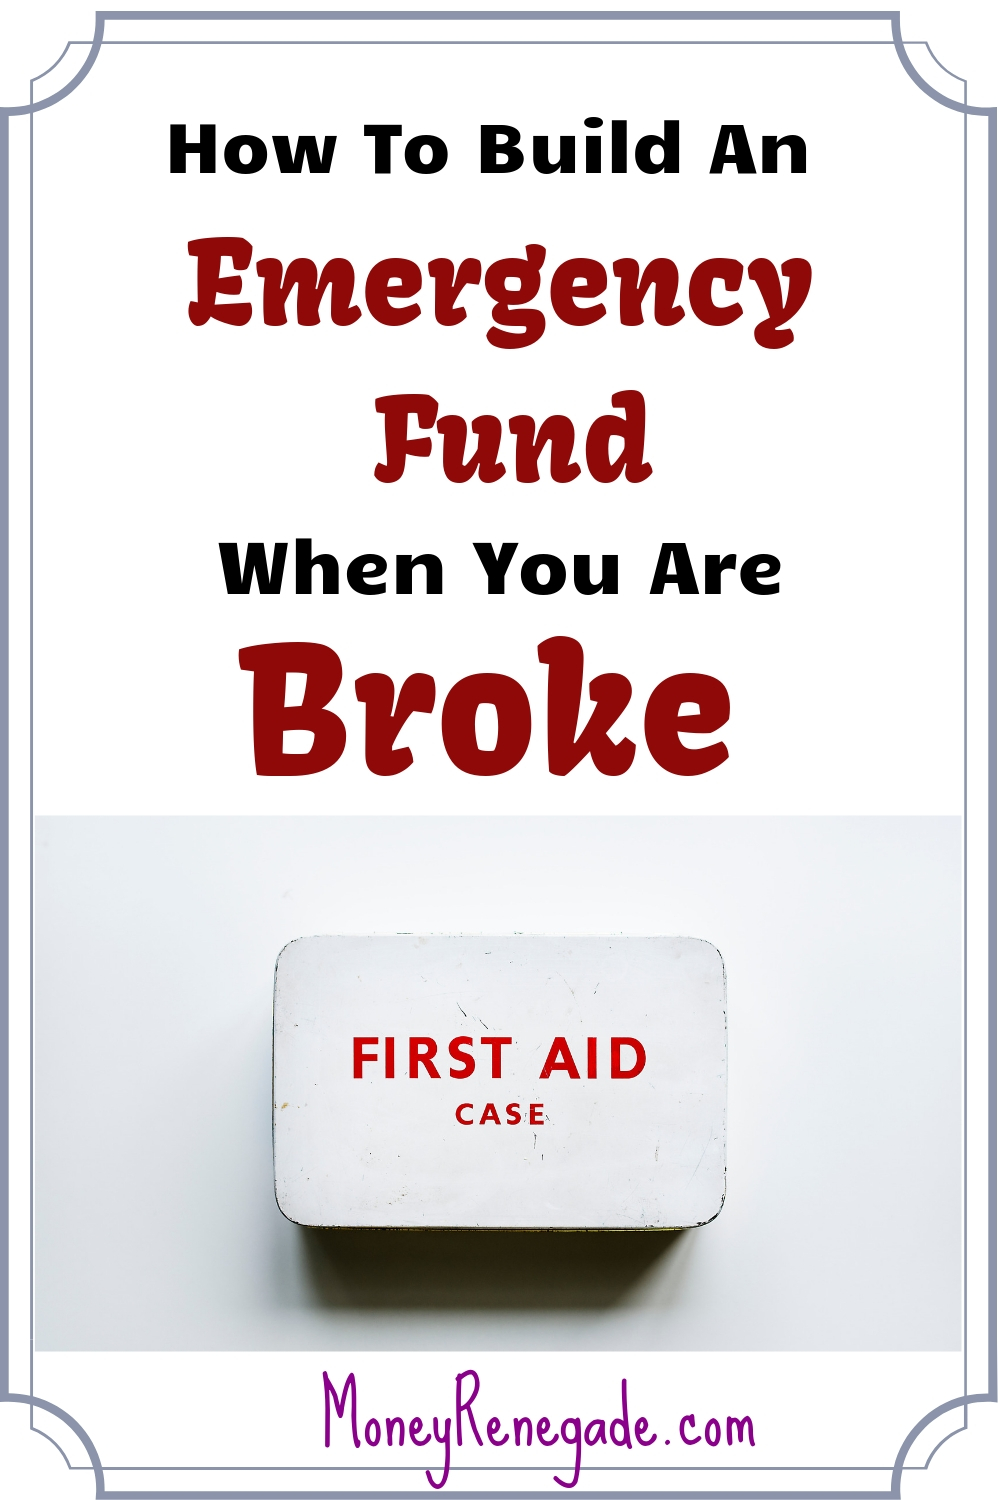 How To Build Emergency Fund When You Are Broke